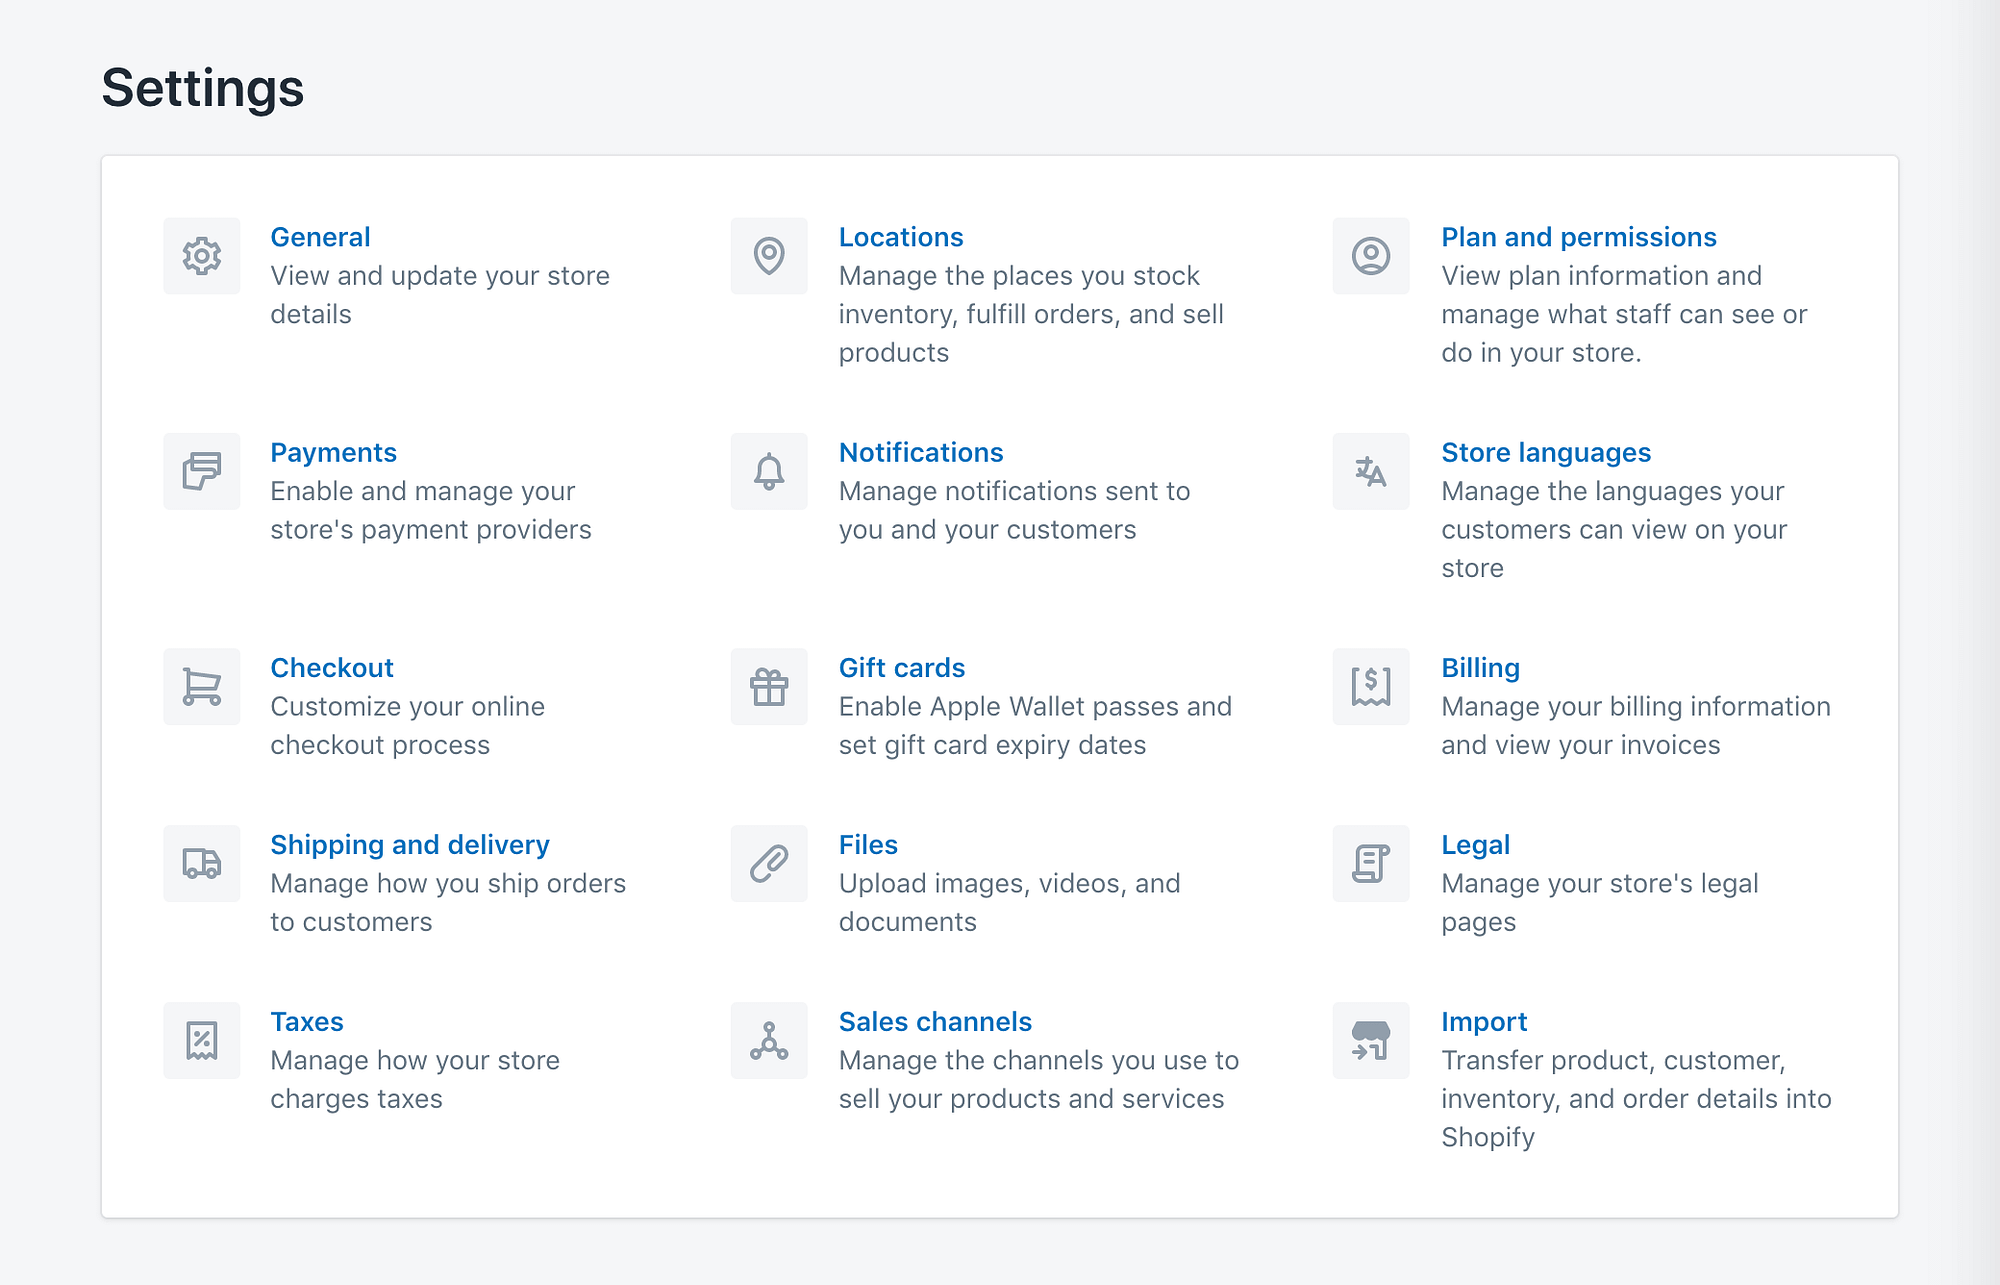 Shopify's general settings